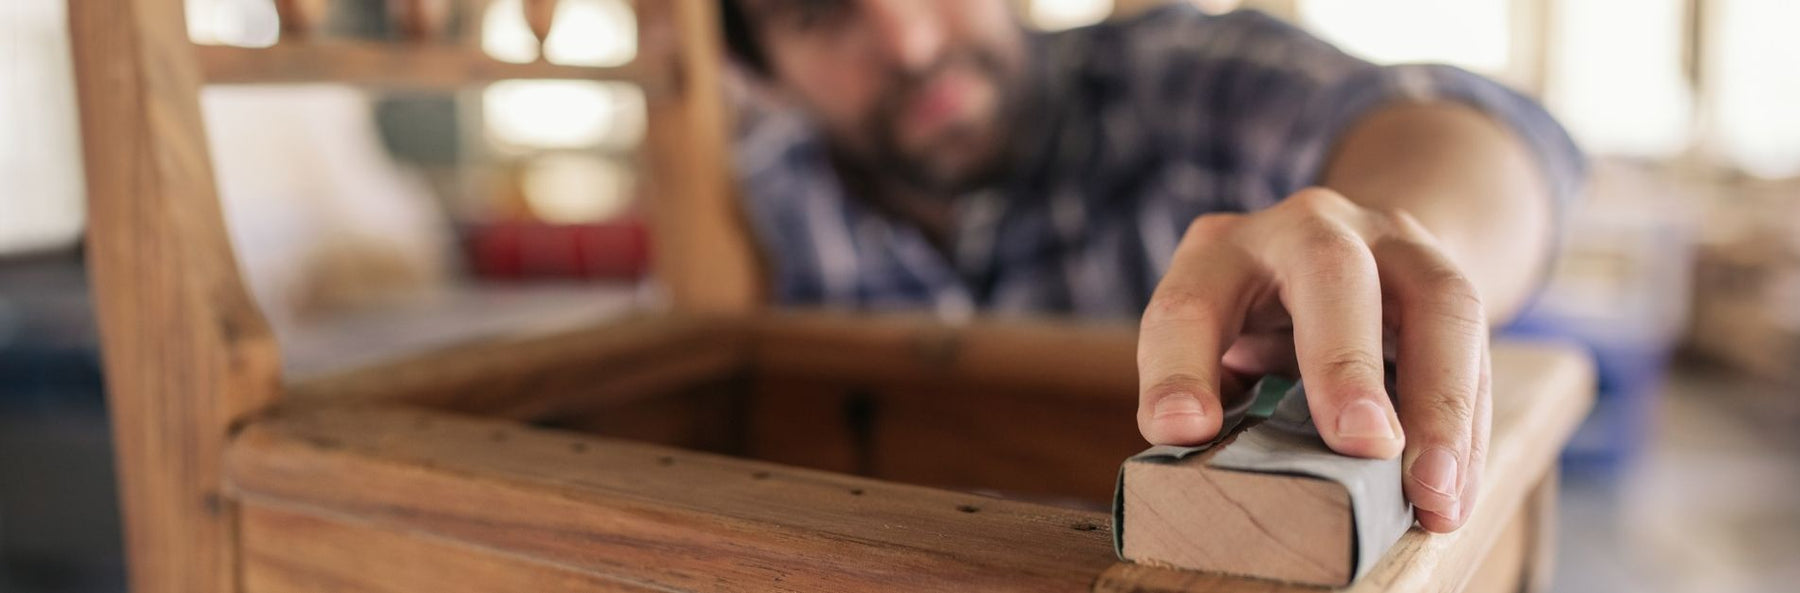 How To Start a Small Woodworking Business on Your Own